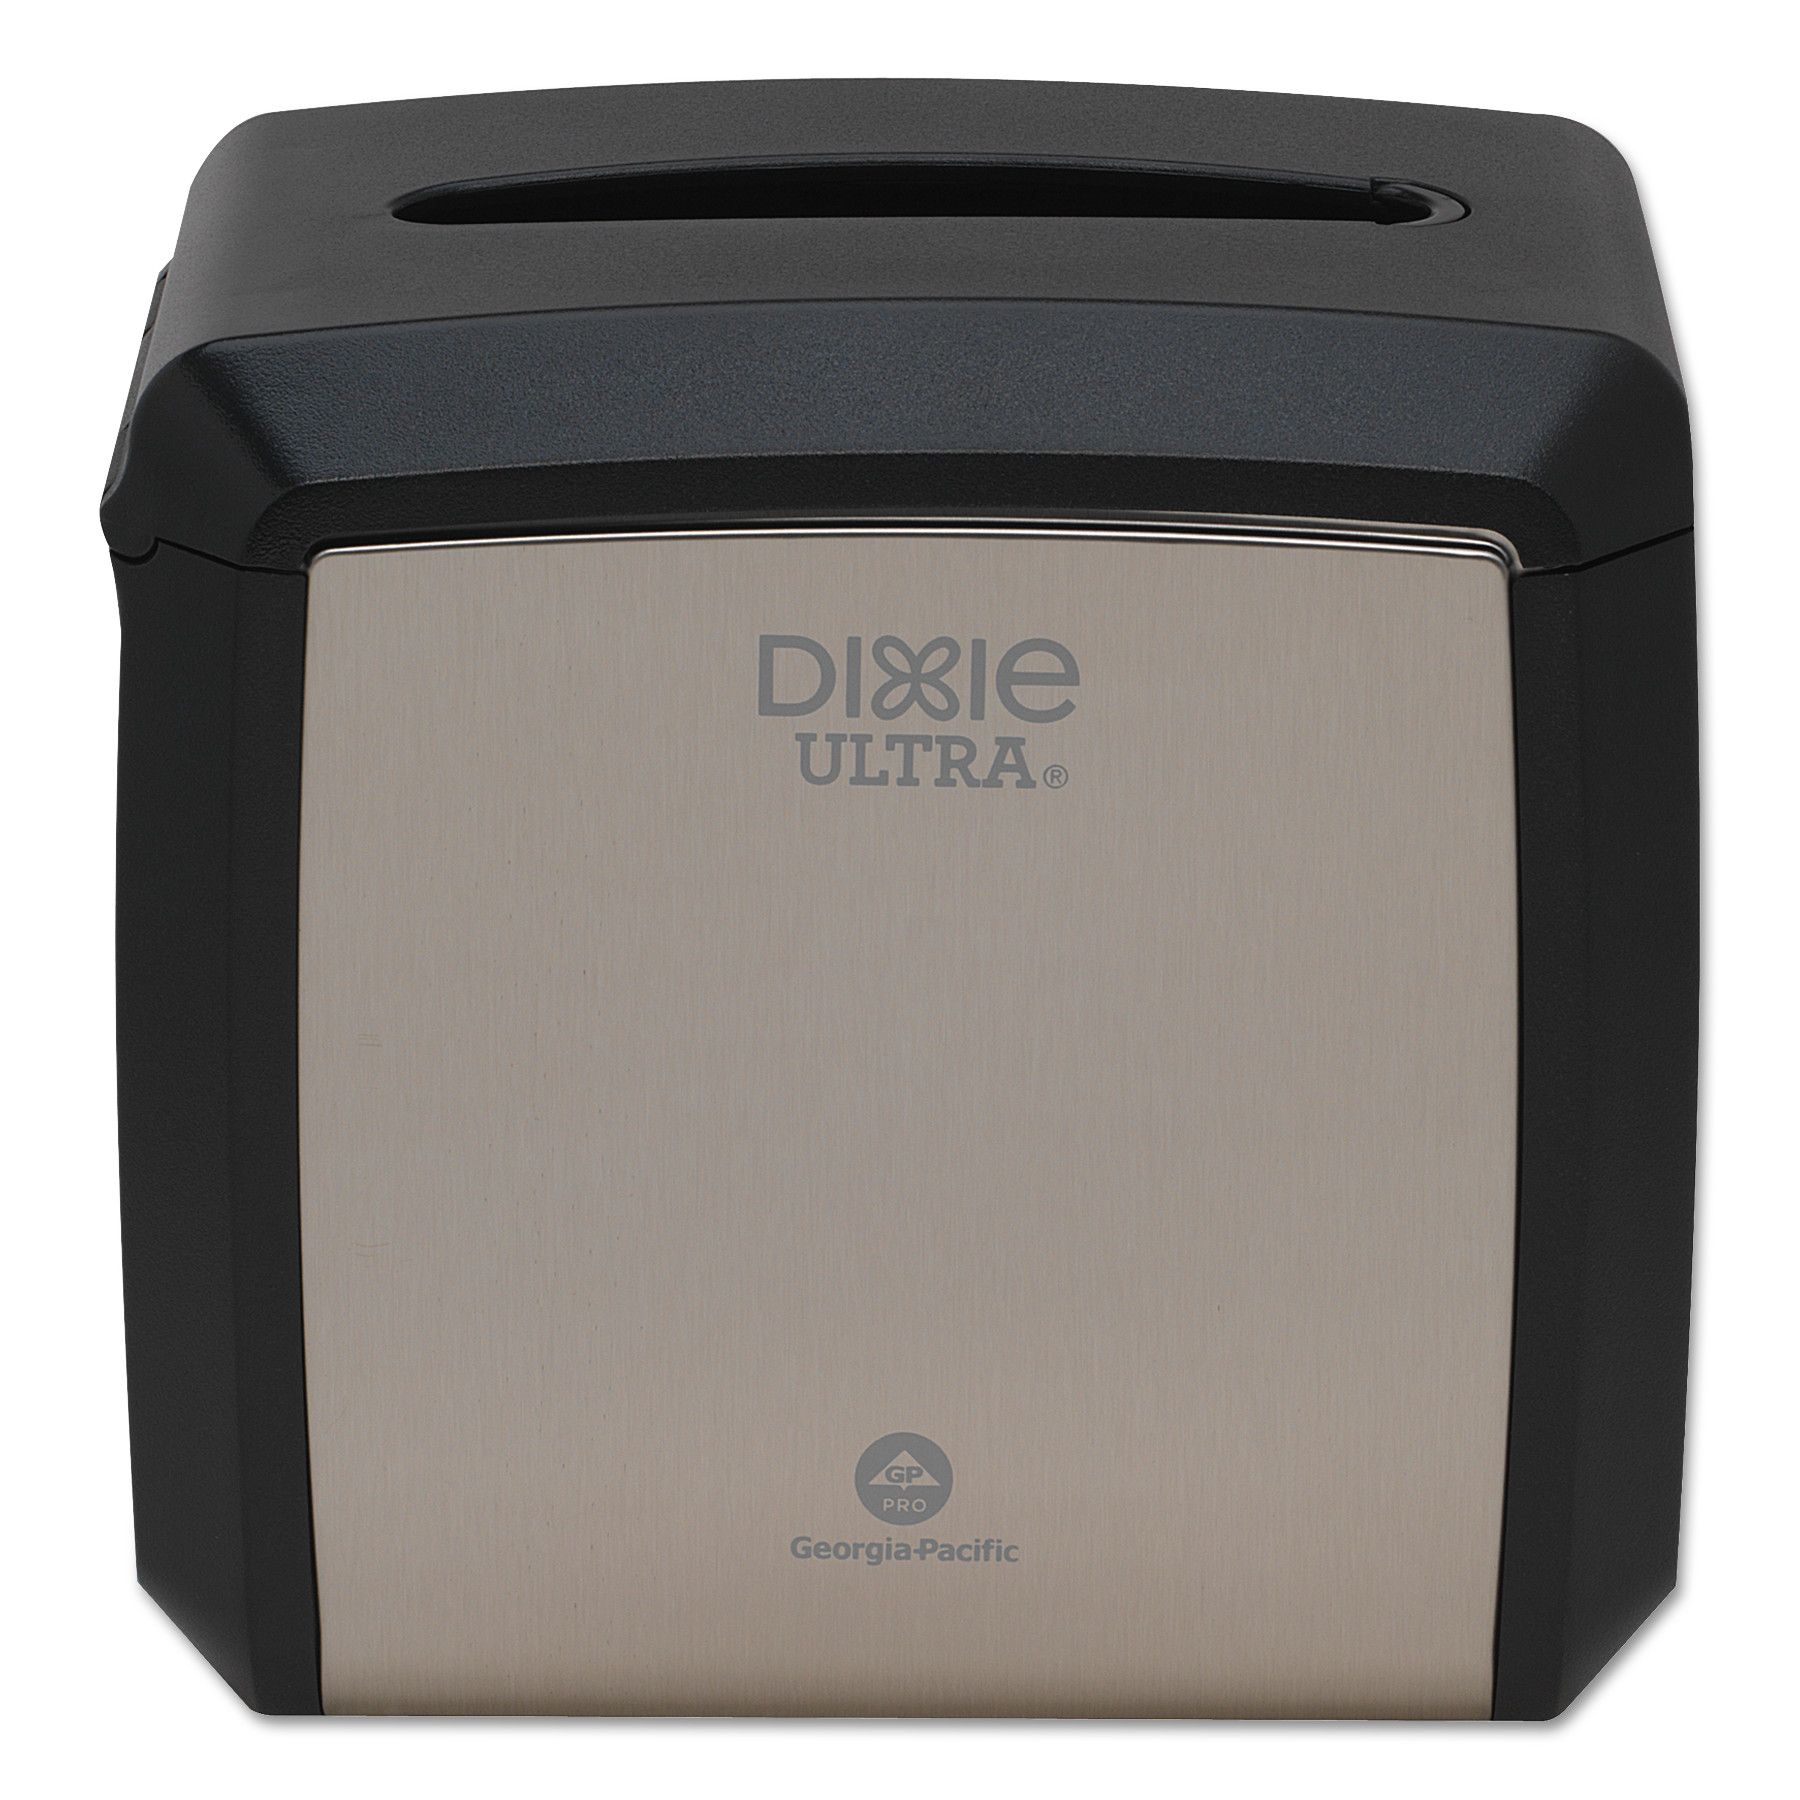  Dixie Ultra 54528A Tabletop Napkin Dispenser, 7.6 x 6.1 x 7.2, Stainless (GPC54528A) 